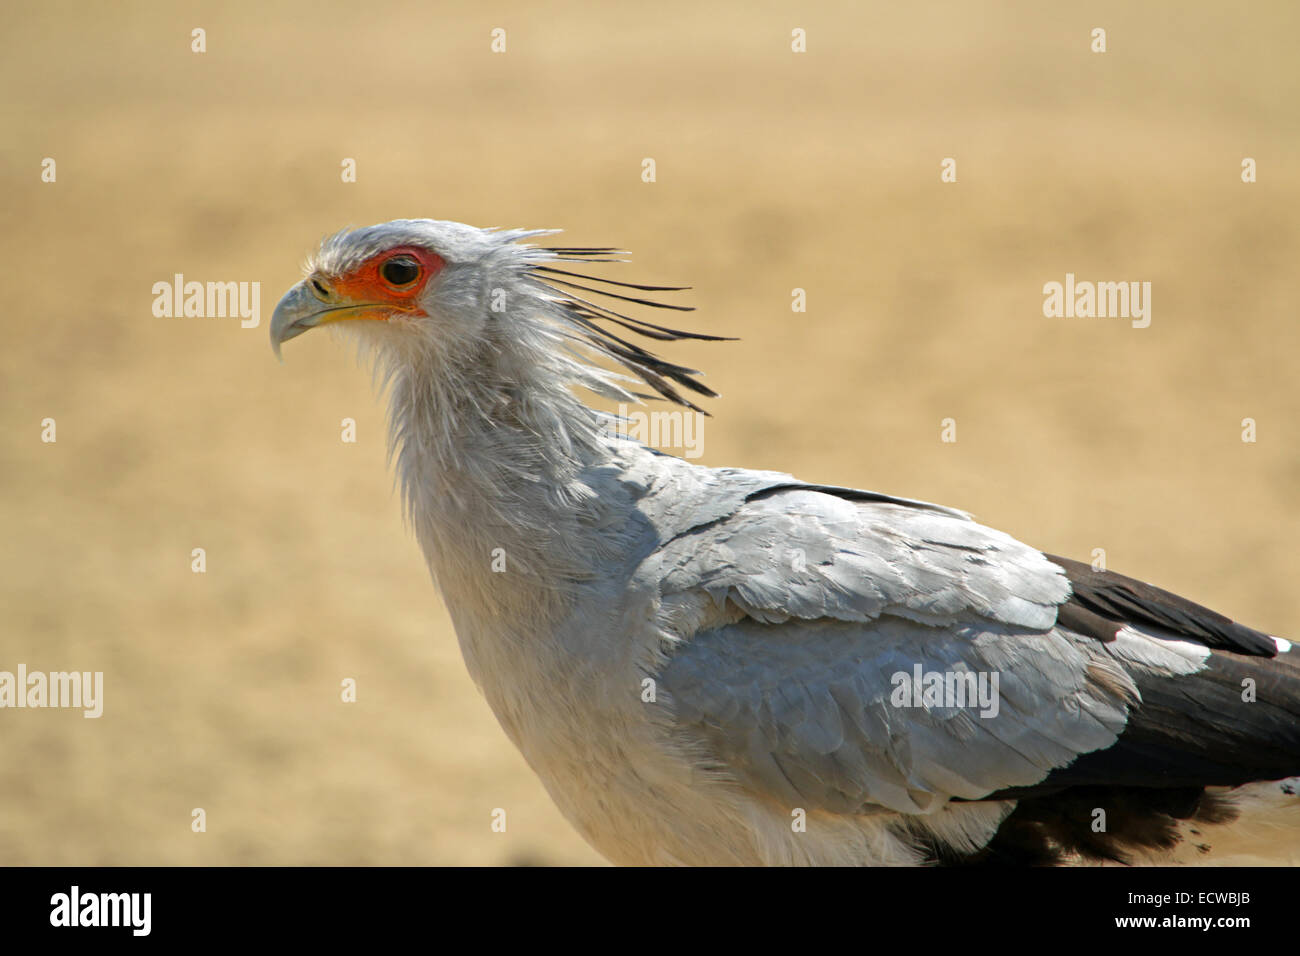 Portrait of a Secretary Bird head  with crested feathers Kgalagadi Transfrontier National Park South Africa Stock Photo